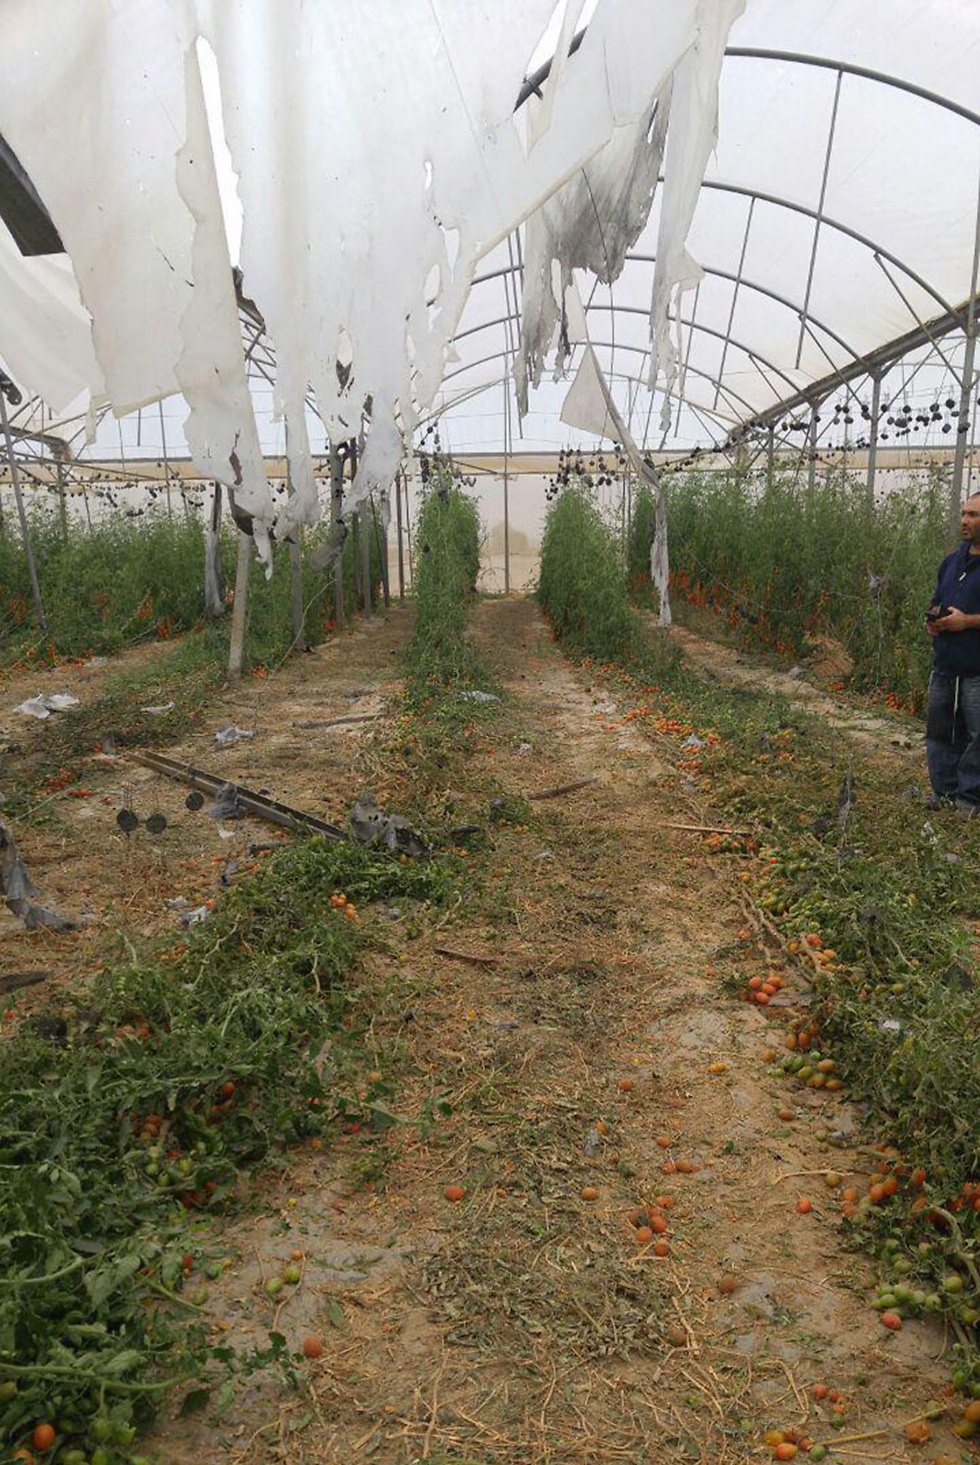 Greenhouse hit by rocket